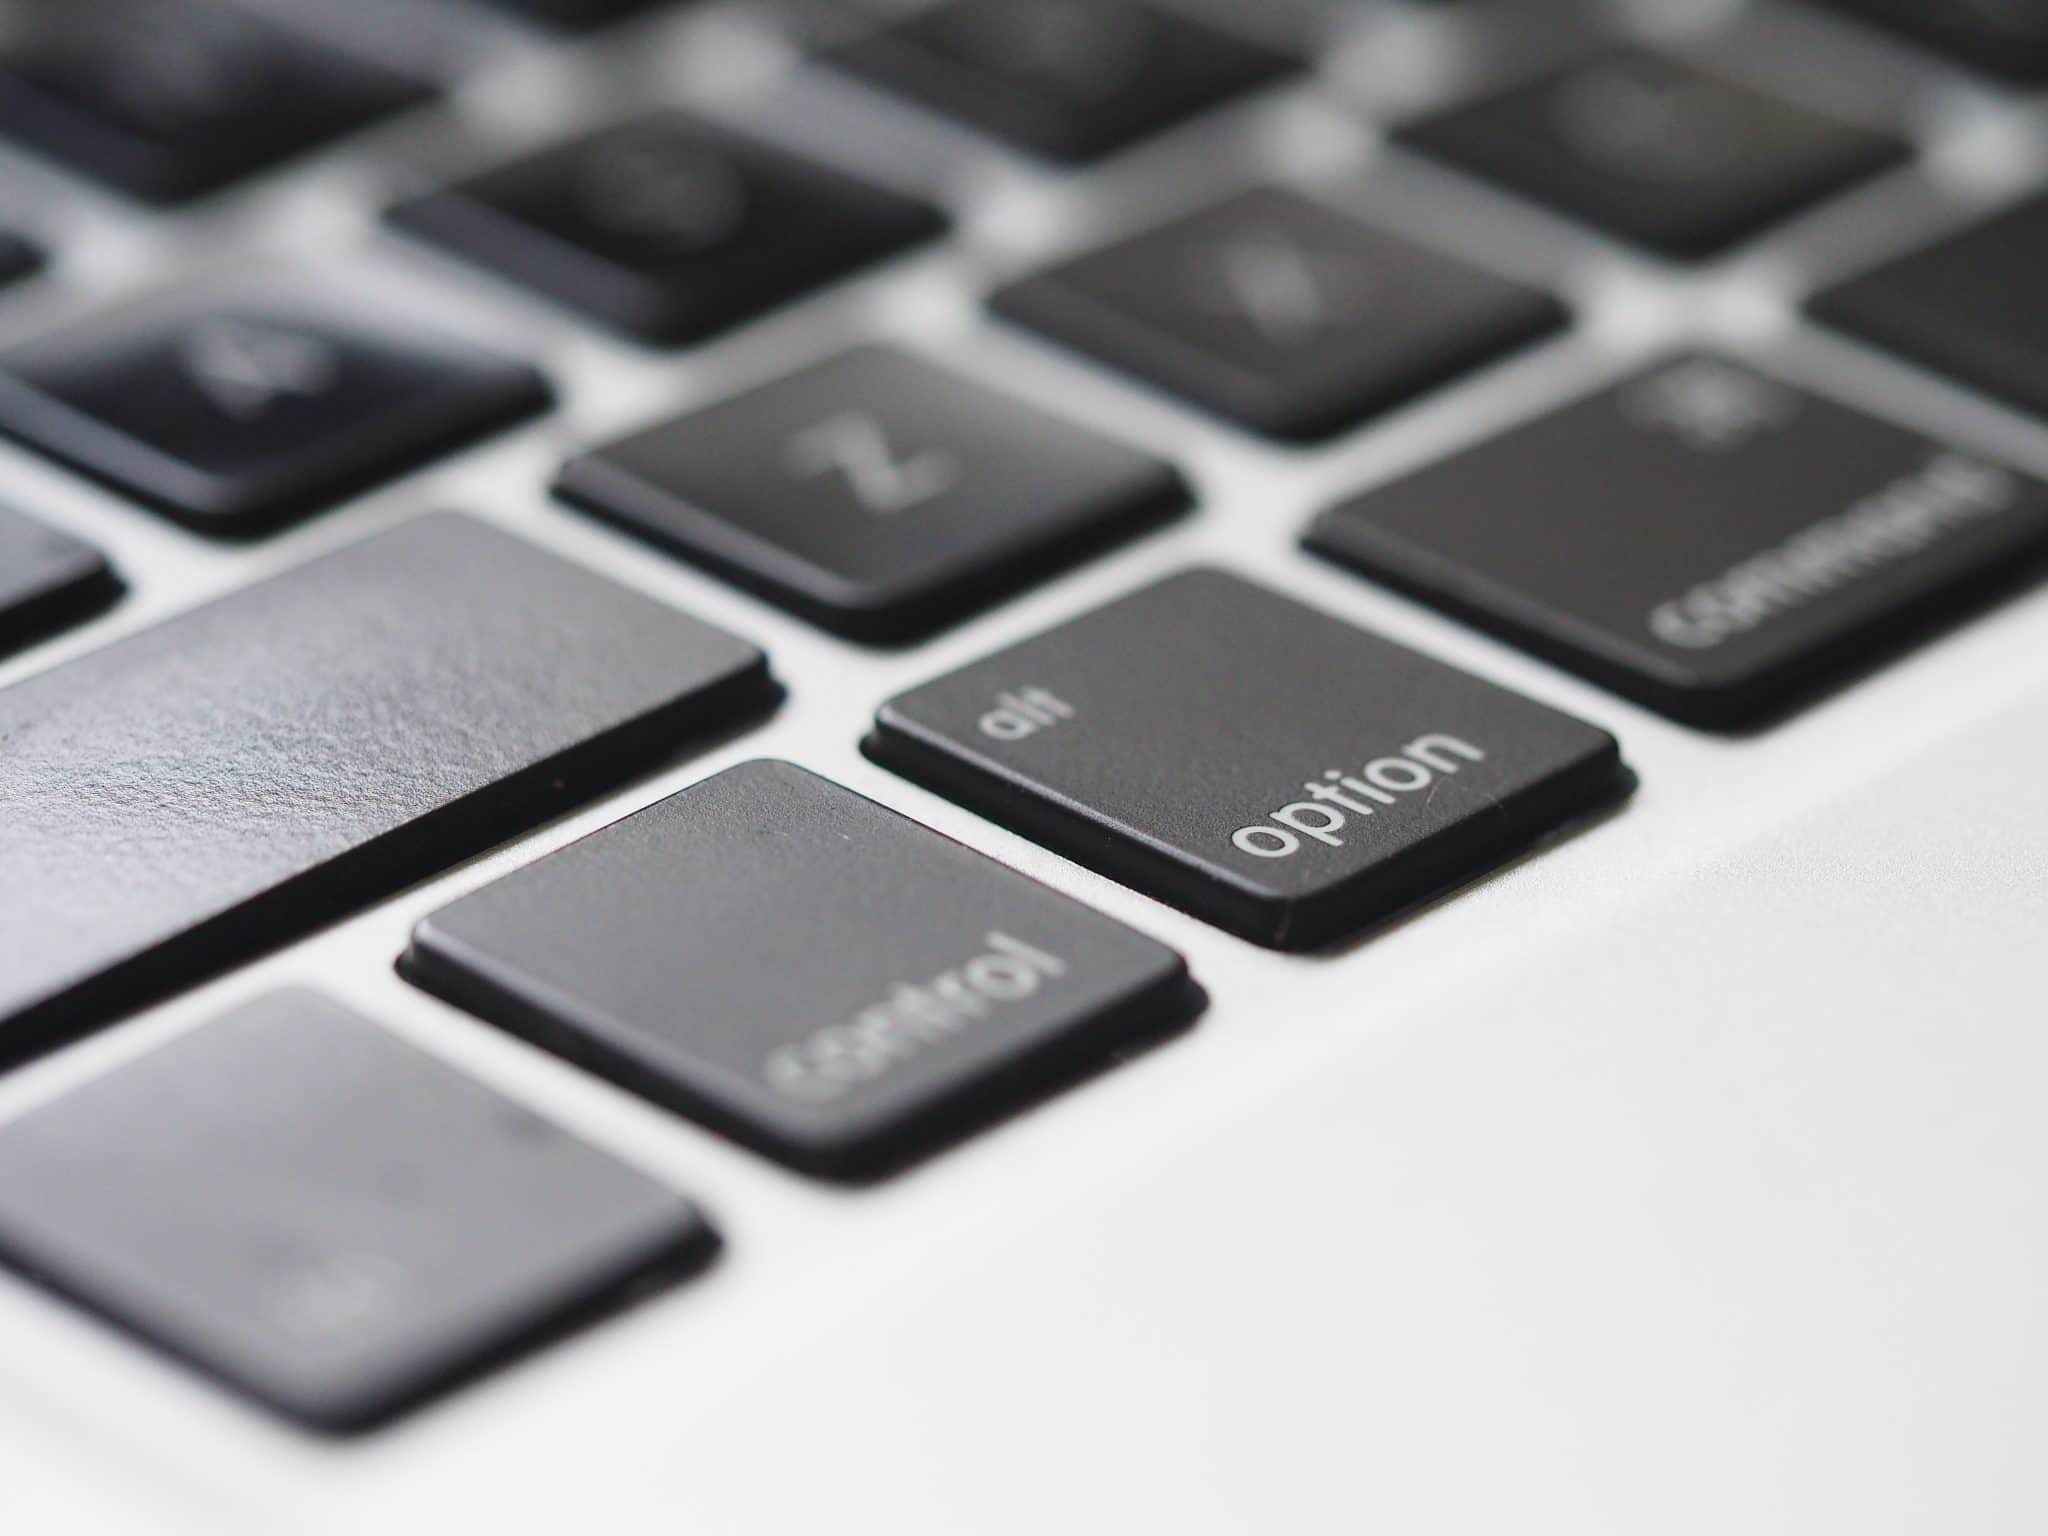 keyboard shortcut to force quit applications in macos